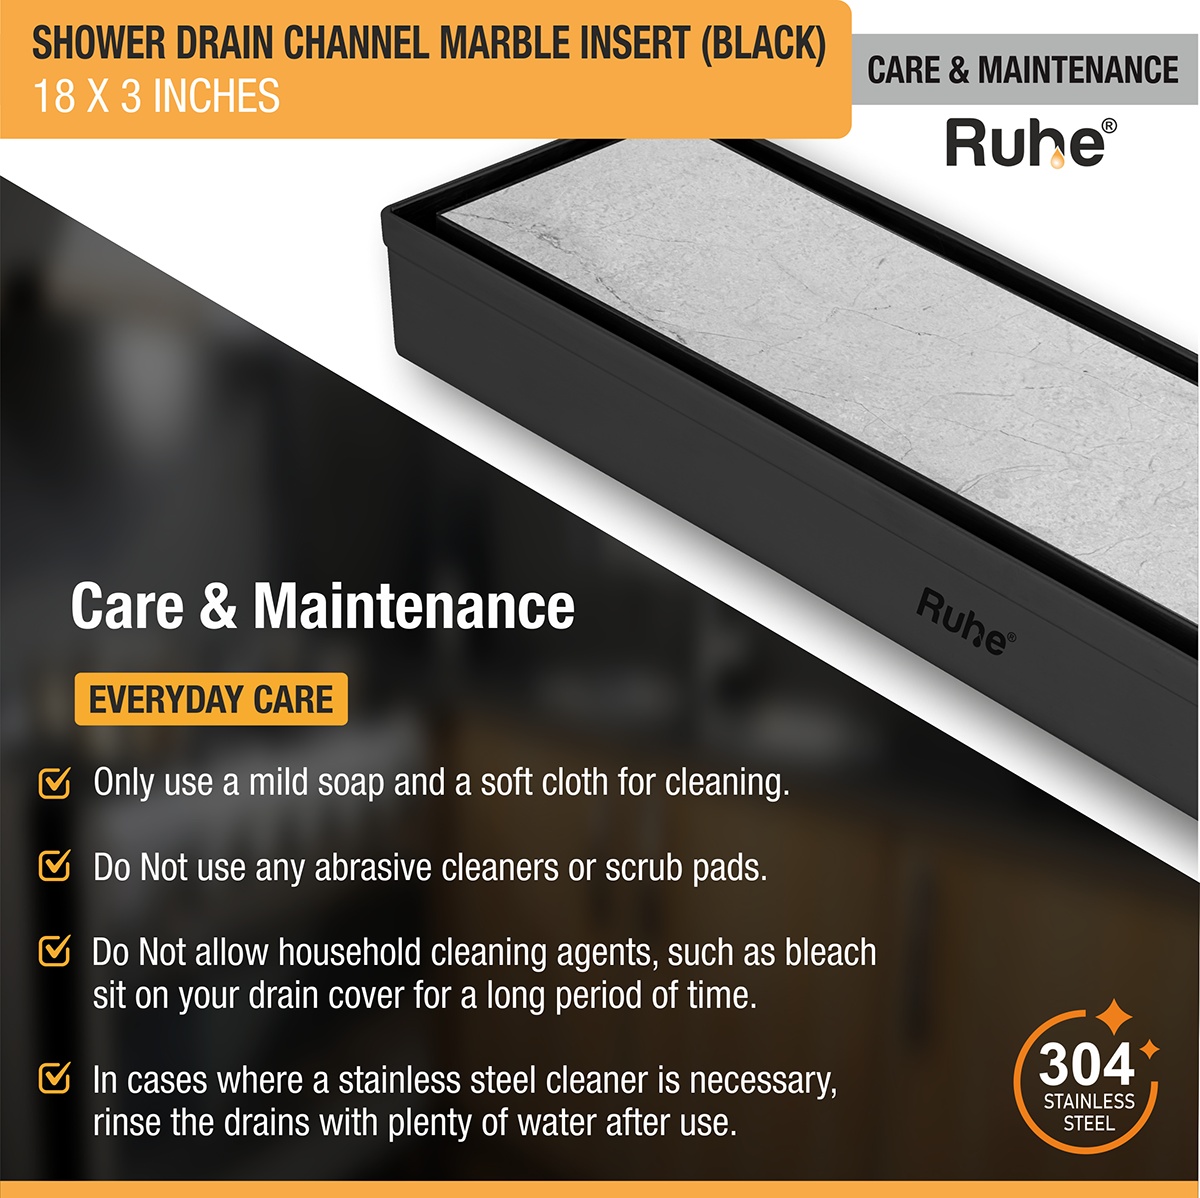 Marble Insert Shower Drain Channel (18 x 3 Inches) Black PVD Coated - by Ruhe®